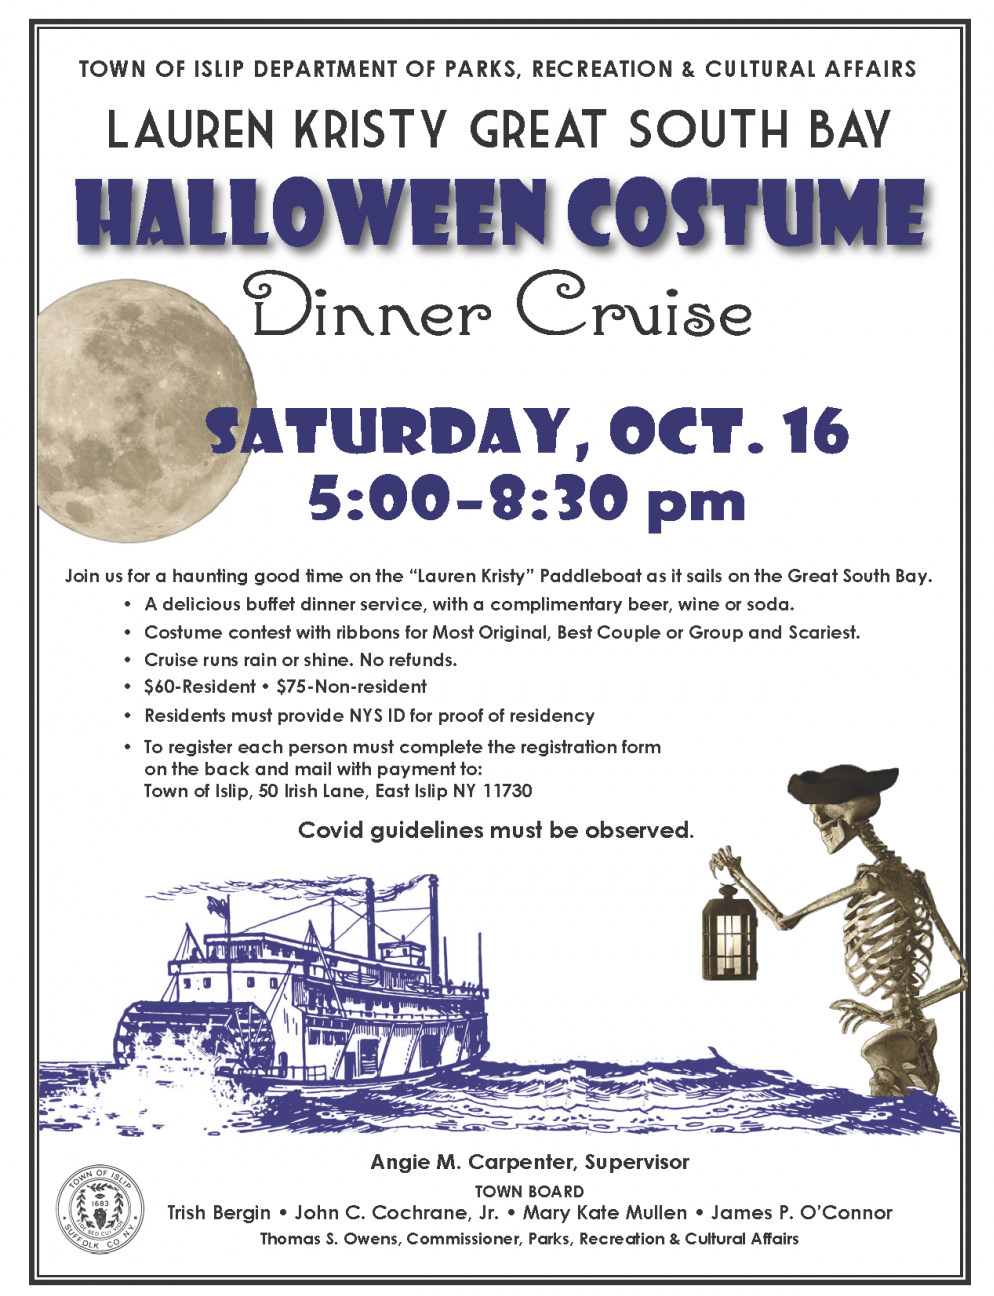 Set sail on the Great South Bay in your best Halloween costume for the Lauren Kristy Dinner Cruise and Costume Contest. For more information or to register, please call the Town's Cultural Affairs office at (631) 224-5430.